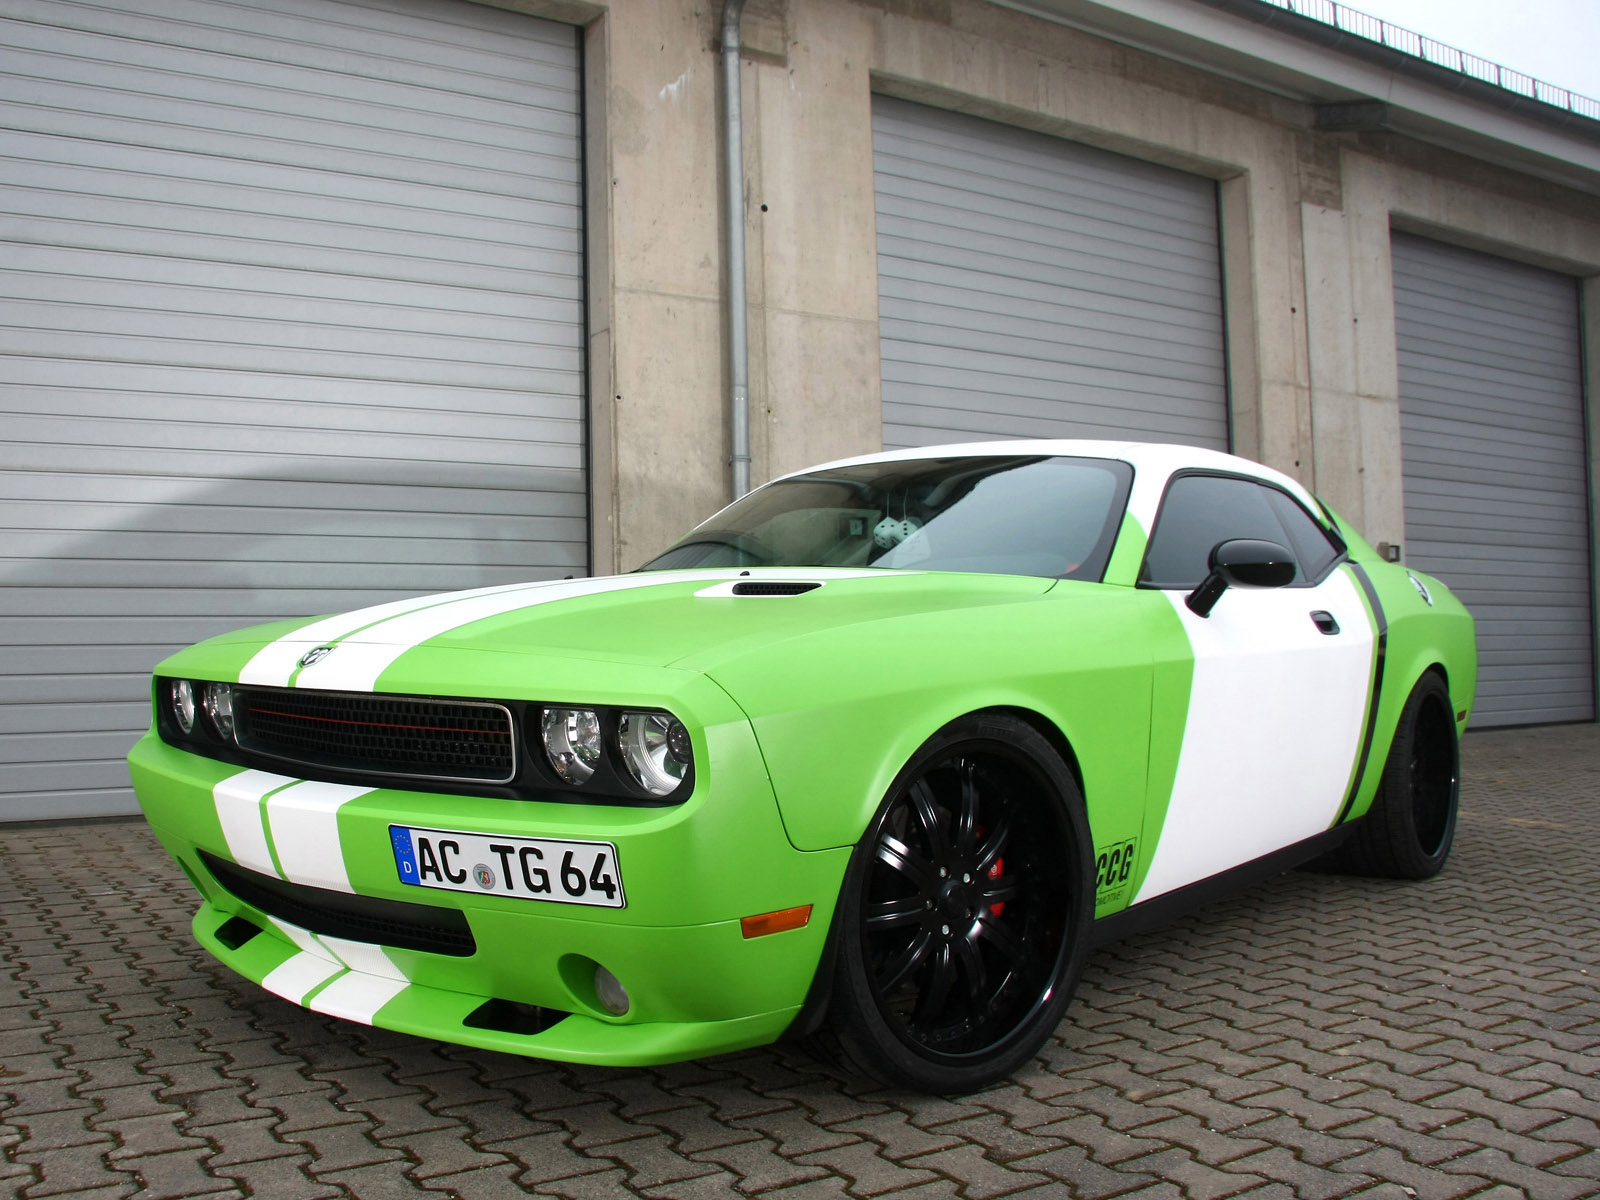 2012, Dodge, Challenger, Srt 8, Muscle, Tuning, Supercar, Supercars Wallpaper